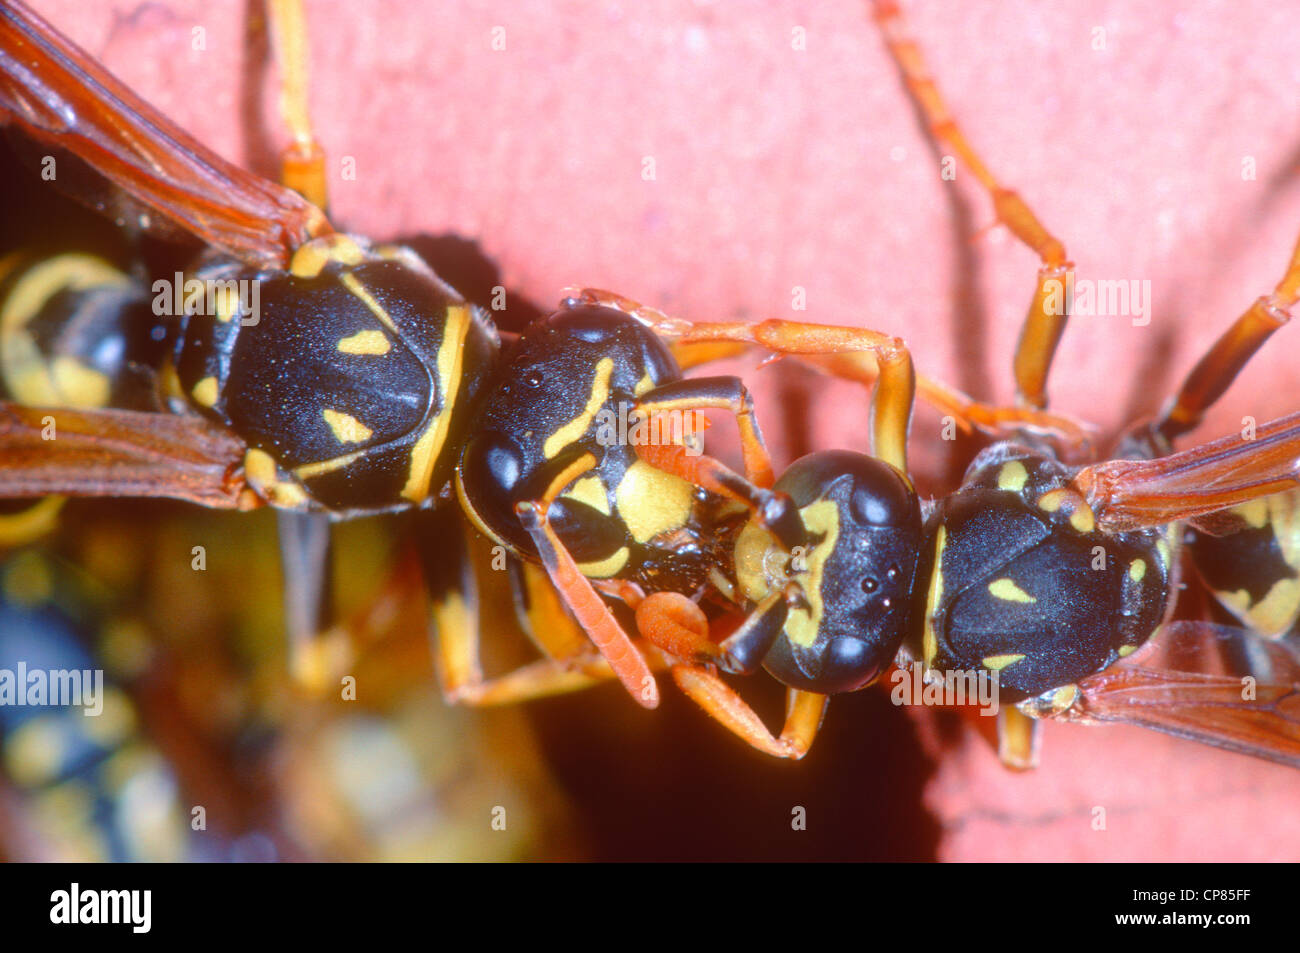 Paper Wasp, Polistes gallicus. Close-up of Trophallactic exchange between two adults in wasps nest. Stock Photo